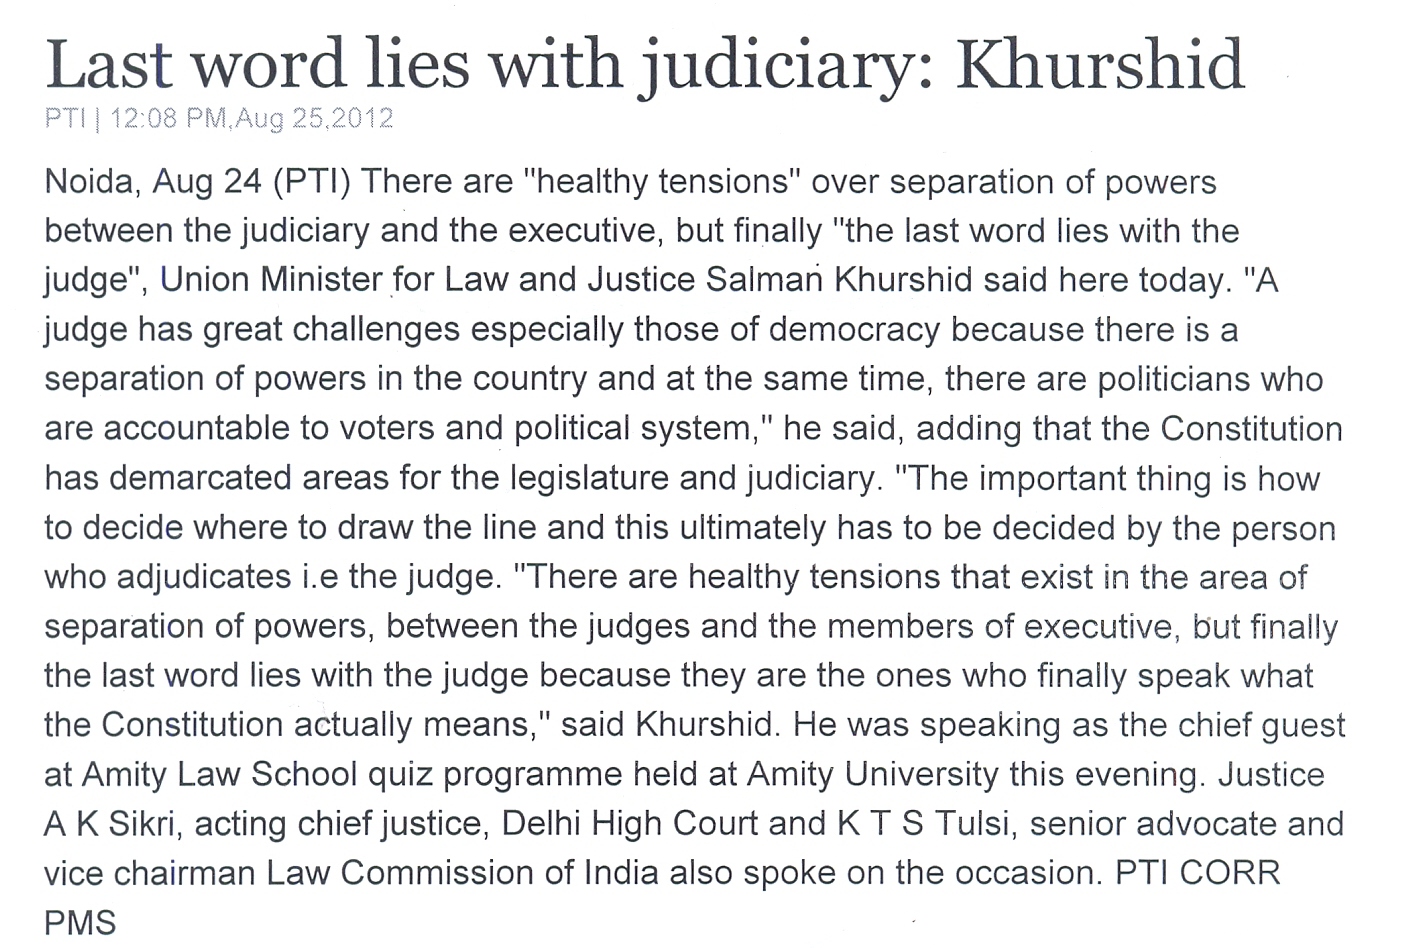 Last word lies with Judiciary says Minister for Law & Justice Mr Salman Khurshid at Amity University